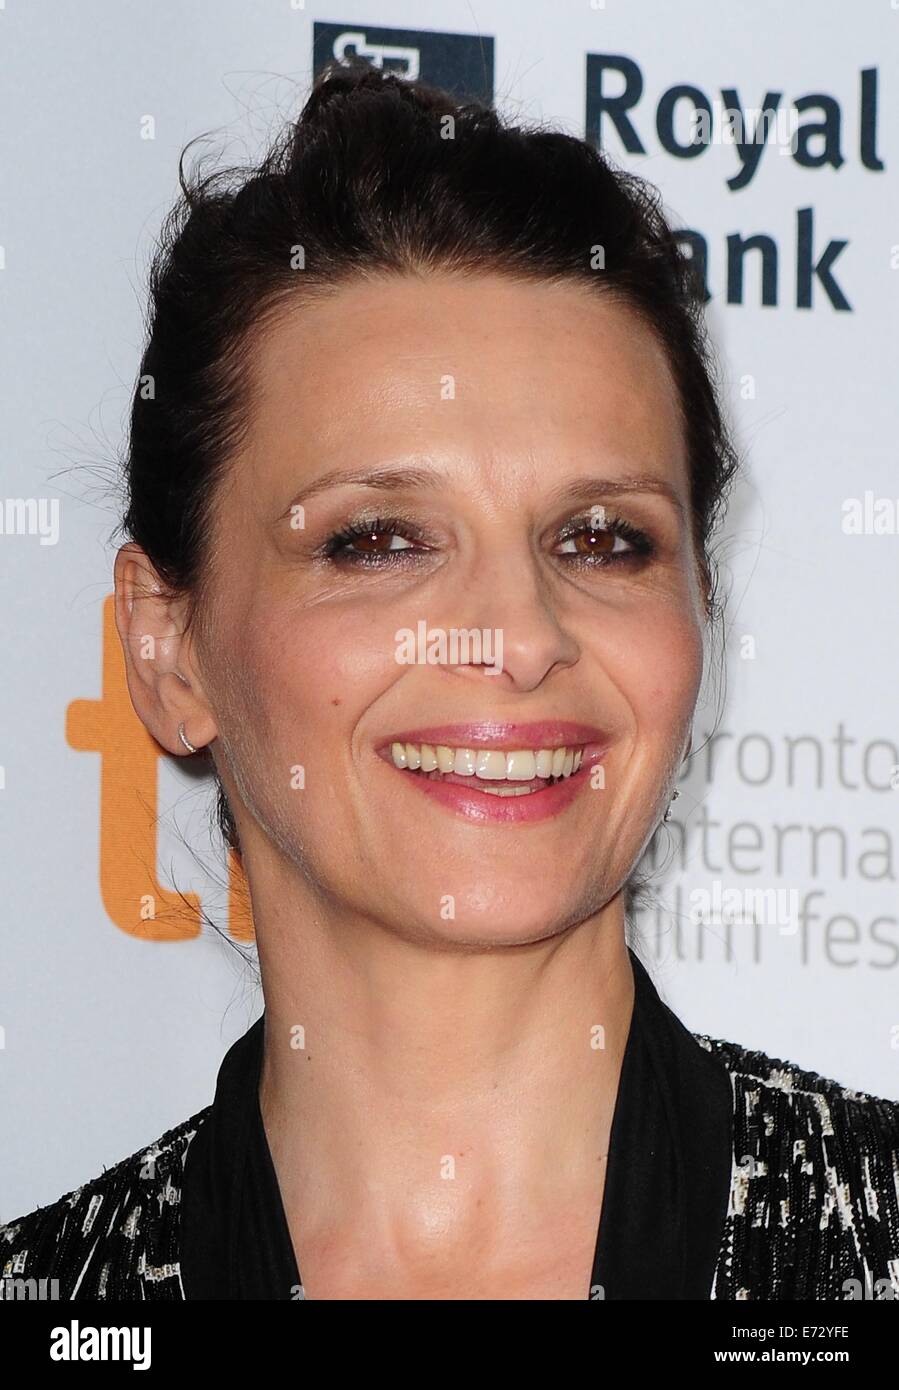 Toronto, ON. 4th Sep, 2014. at arrivals for CLOUDS OF SILS MARIA Premiere at the Toronto International Film Festival 2014, Princess of Wales Theatre, Toronto, ON September 4, 2014. Credit:  Gregorio Binuya/Everett Collection/Alamy Live News Stock Photo